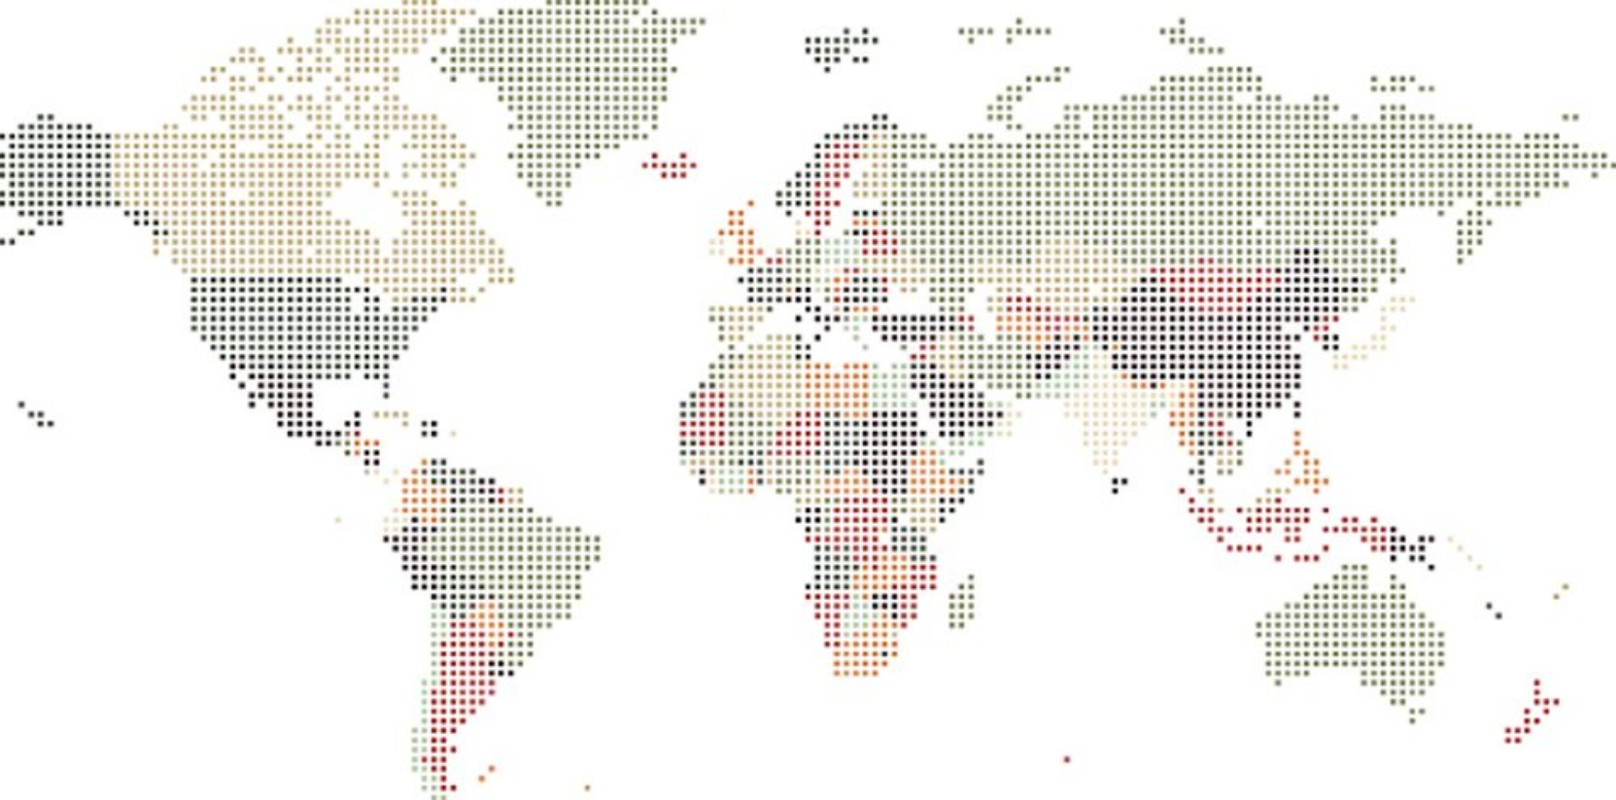 Image de Dotted World map of square dots